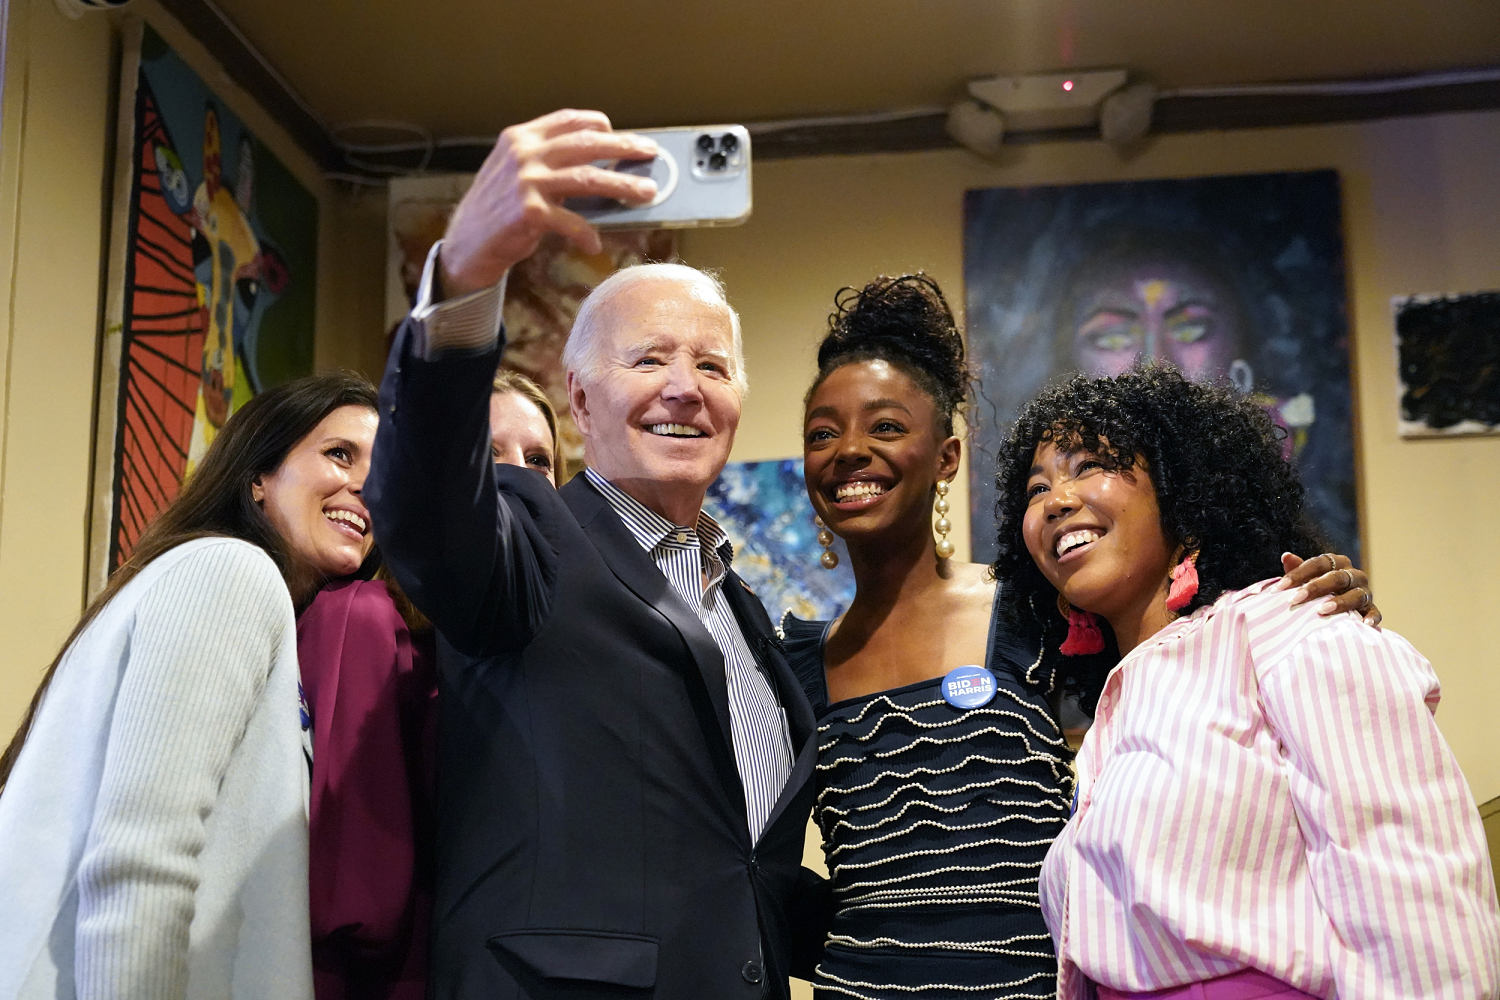 Biden campaign set to double down on Black voter outreach with visits to Georgia and Detroit this weekend